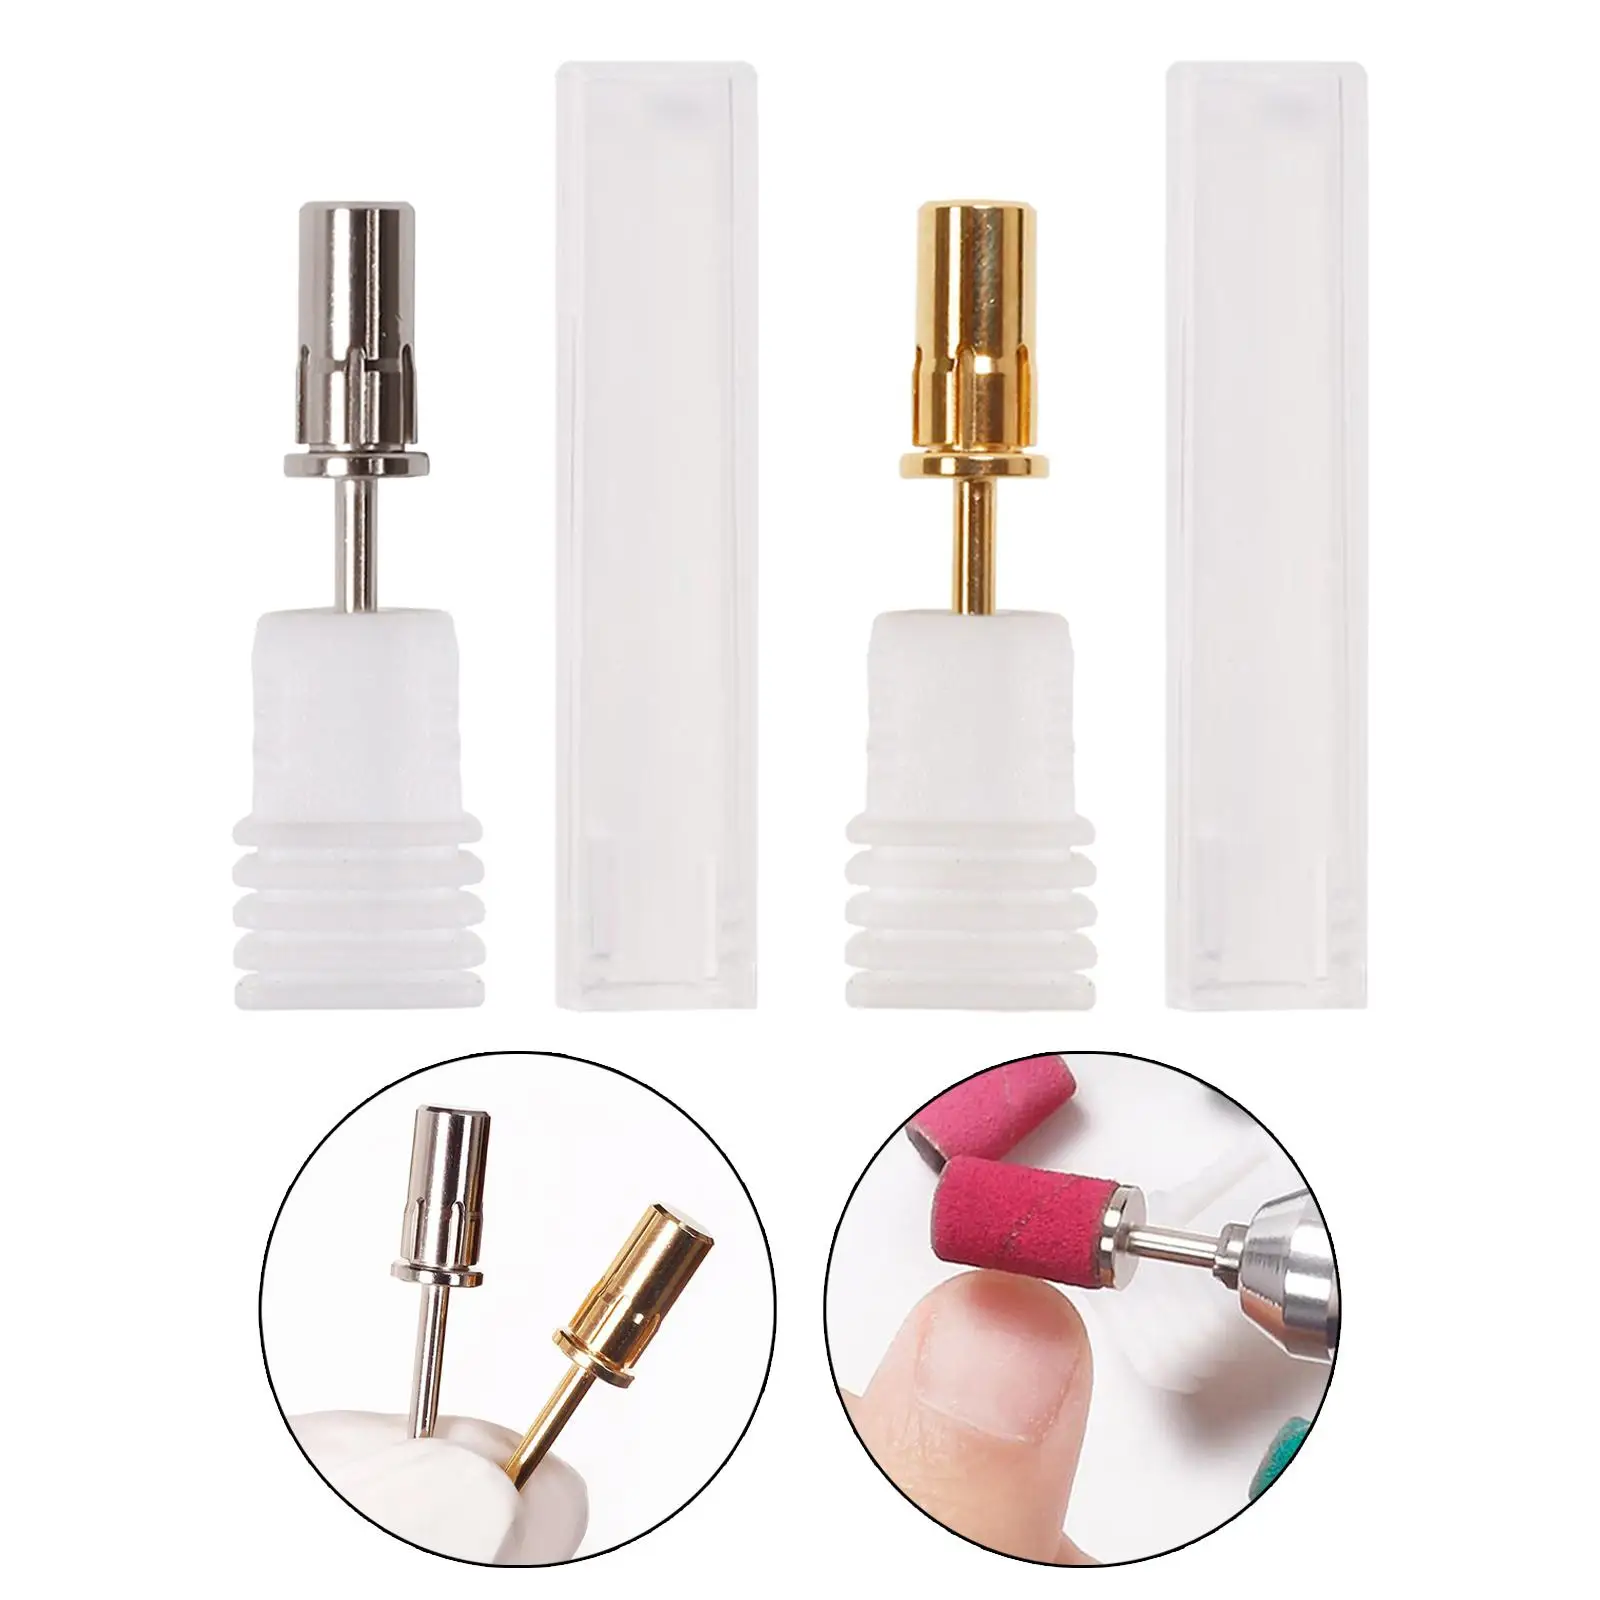 Nail Drill Bit Professional Nail Cleaner Sanding Band Shaft for Sanding Band and Manicure Acrylics Gel Nails Electric Nail File